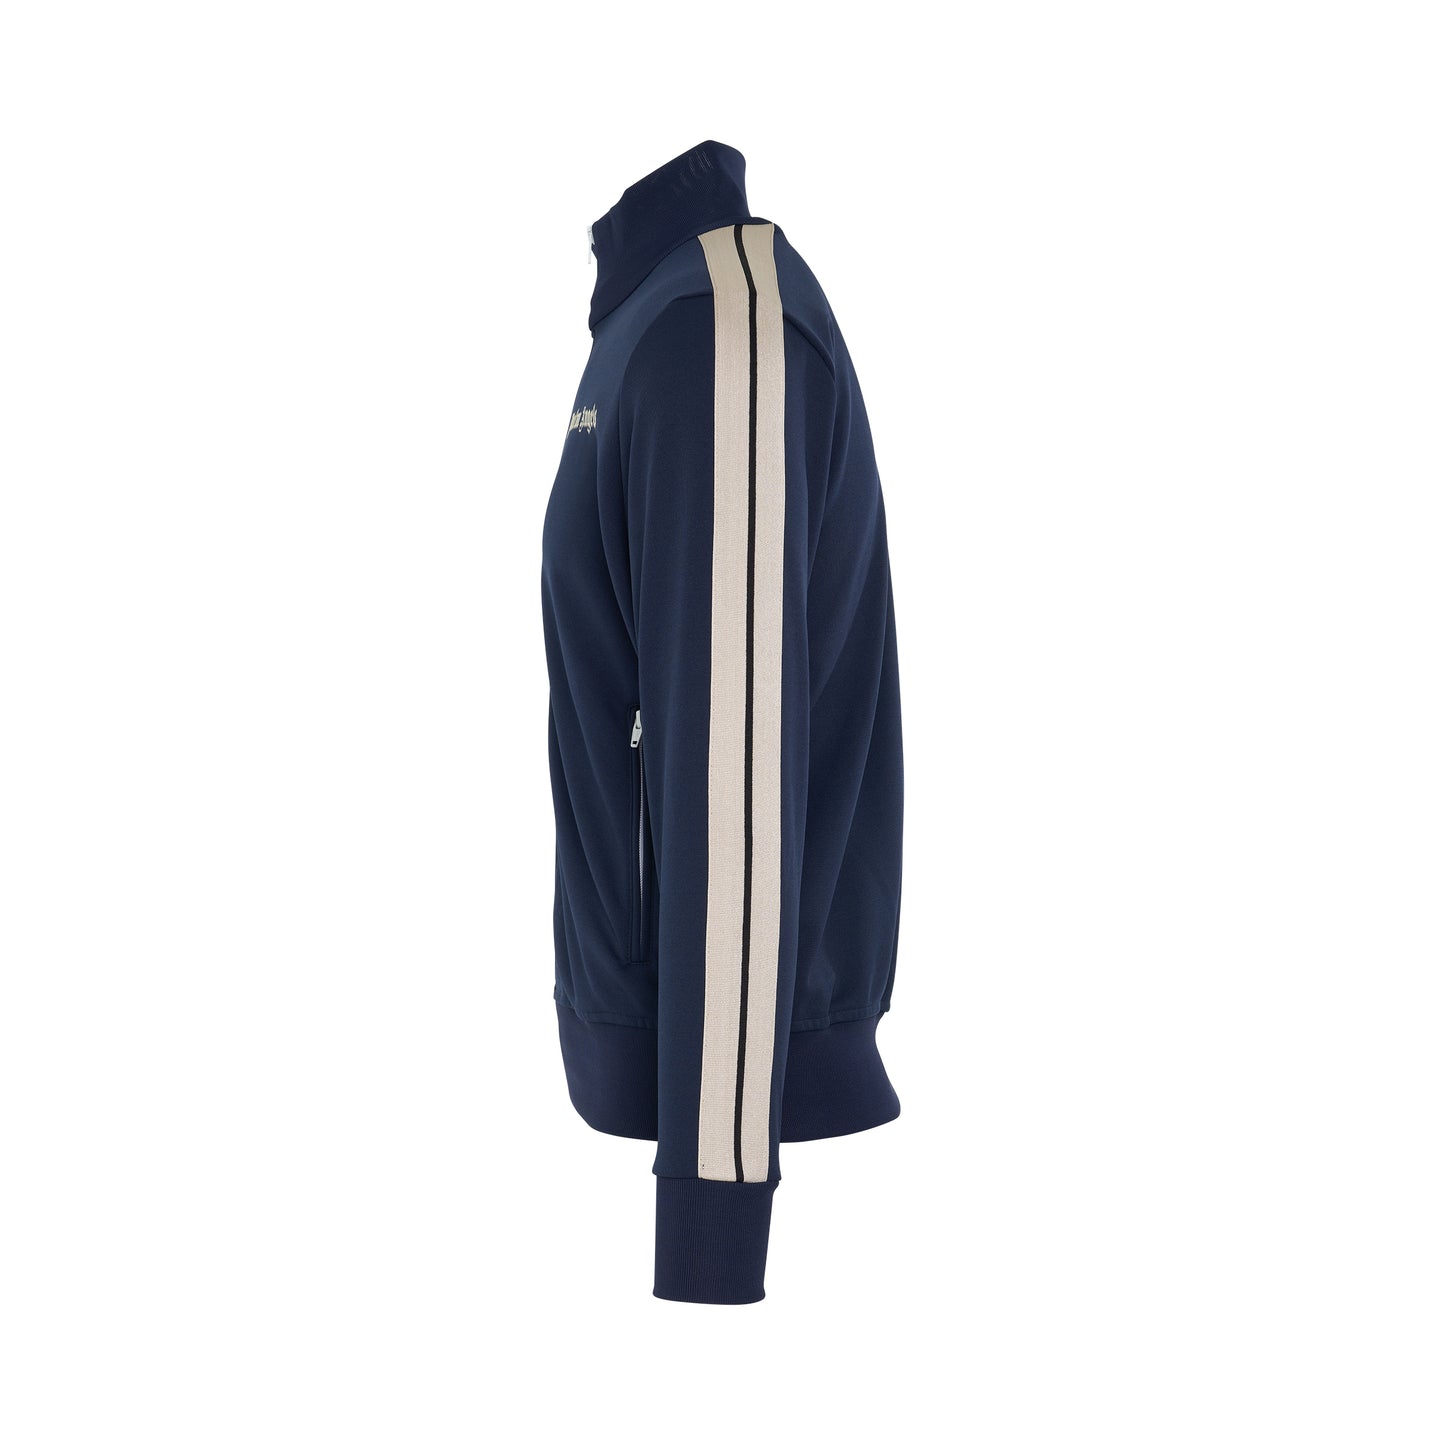 Classic Track Jacket in Navy Blue/White